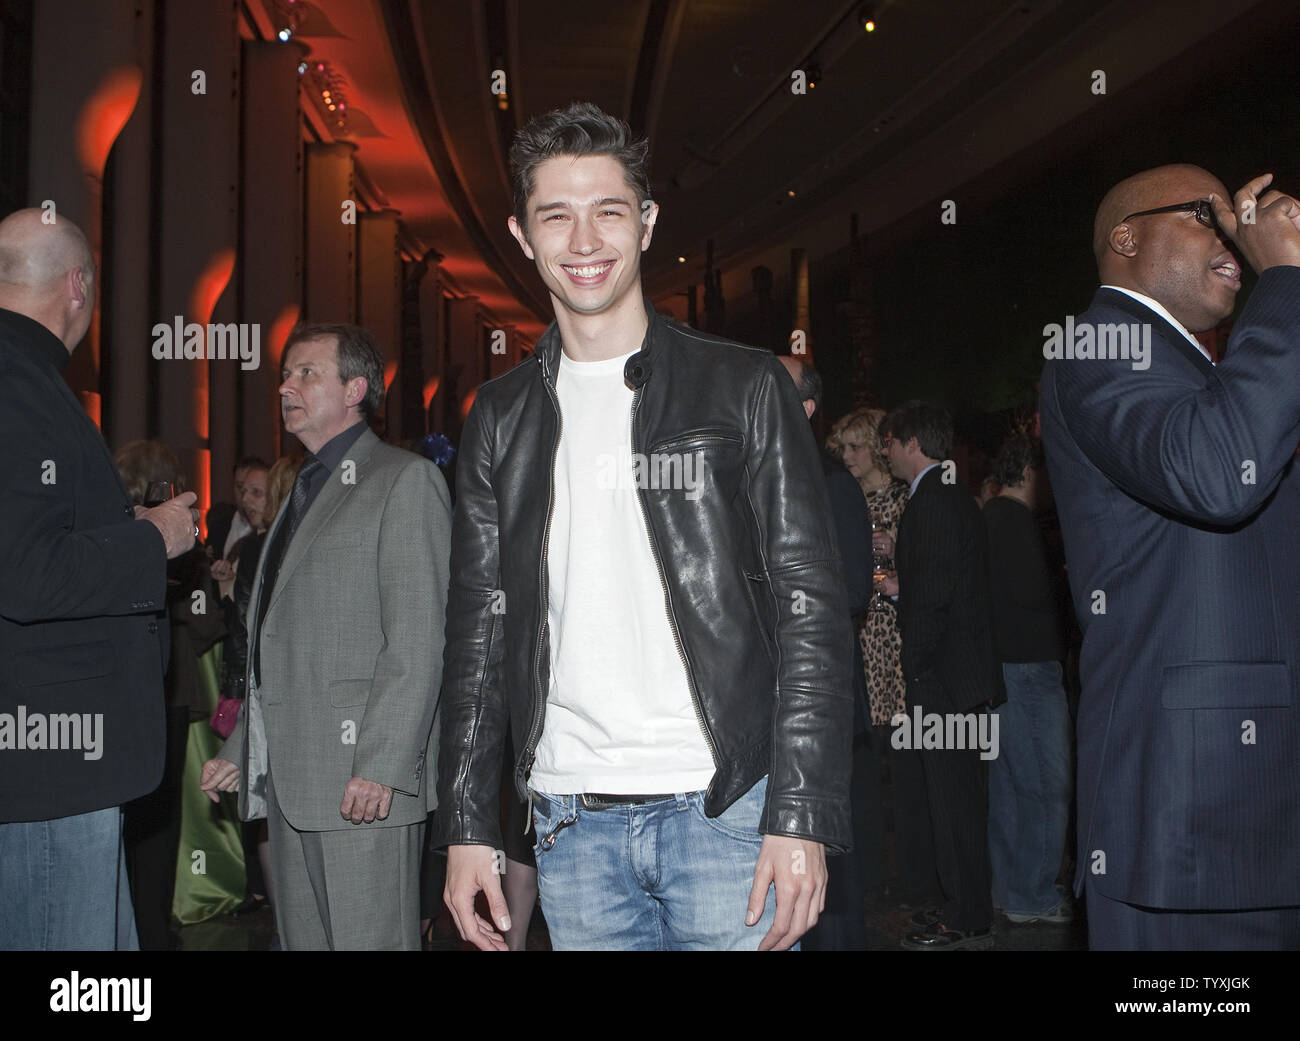 Actor Devon Bostick arrives for a Reception at the Canadian Museum of Civilization, April 3, 2009, leading up to tomorrow's 2009 Genie Awards. The Genie Awards are Canada's version of the Oscars. (UPI Photo/Heinz Ruckemann) Stock Photo